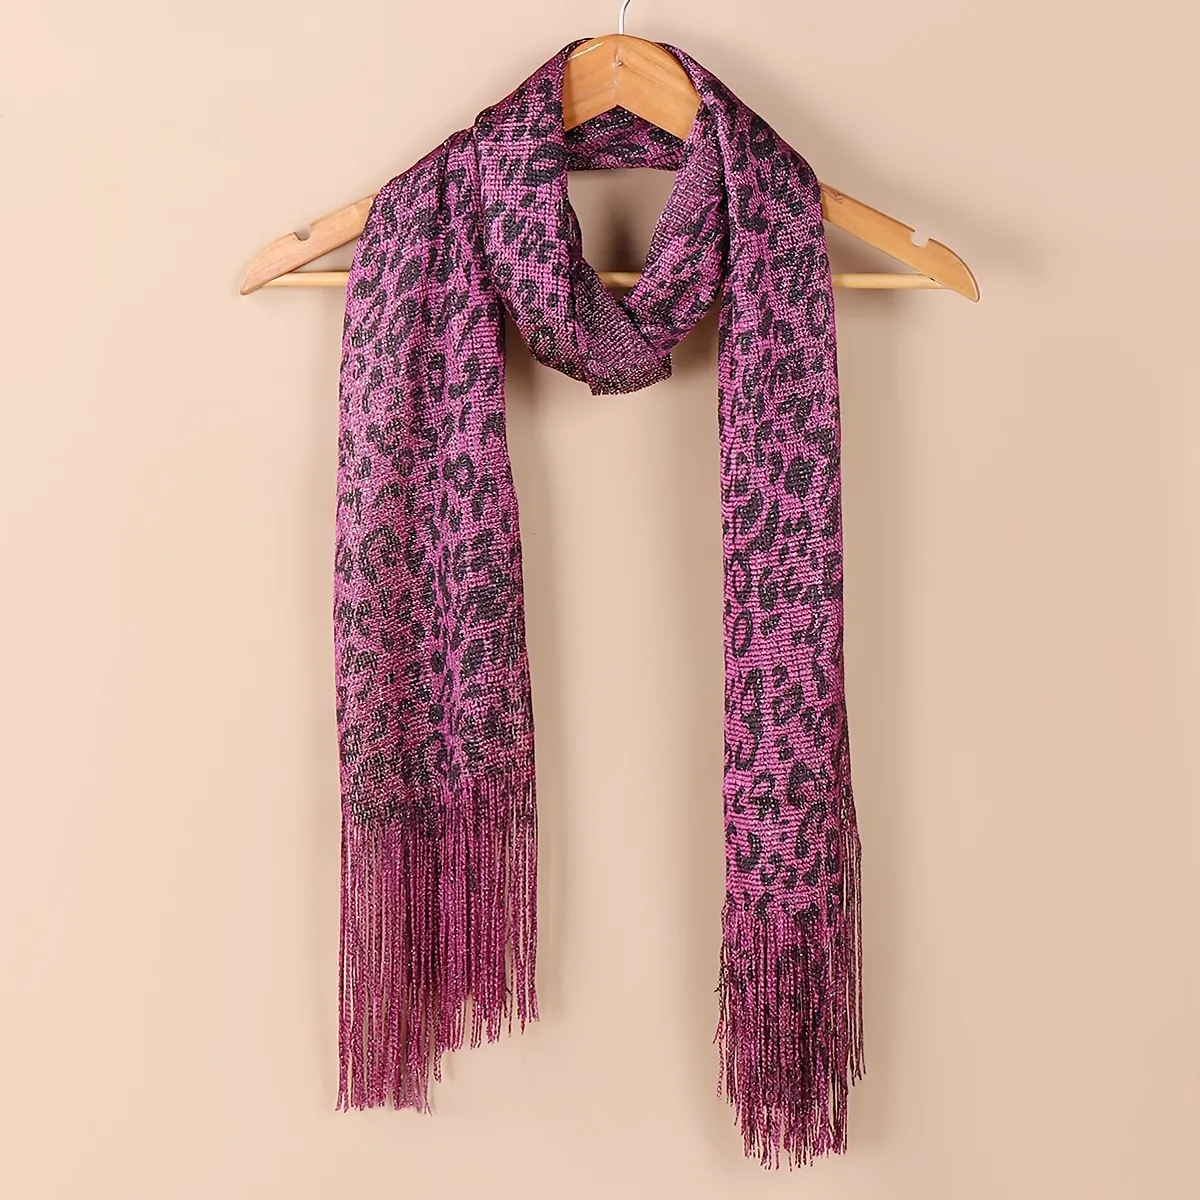 NEED: Leopard Scarf!  Stole scarf, Lv scarf, Clothing staples